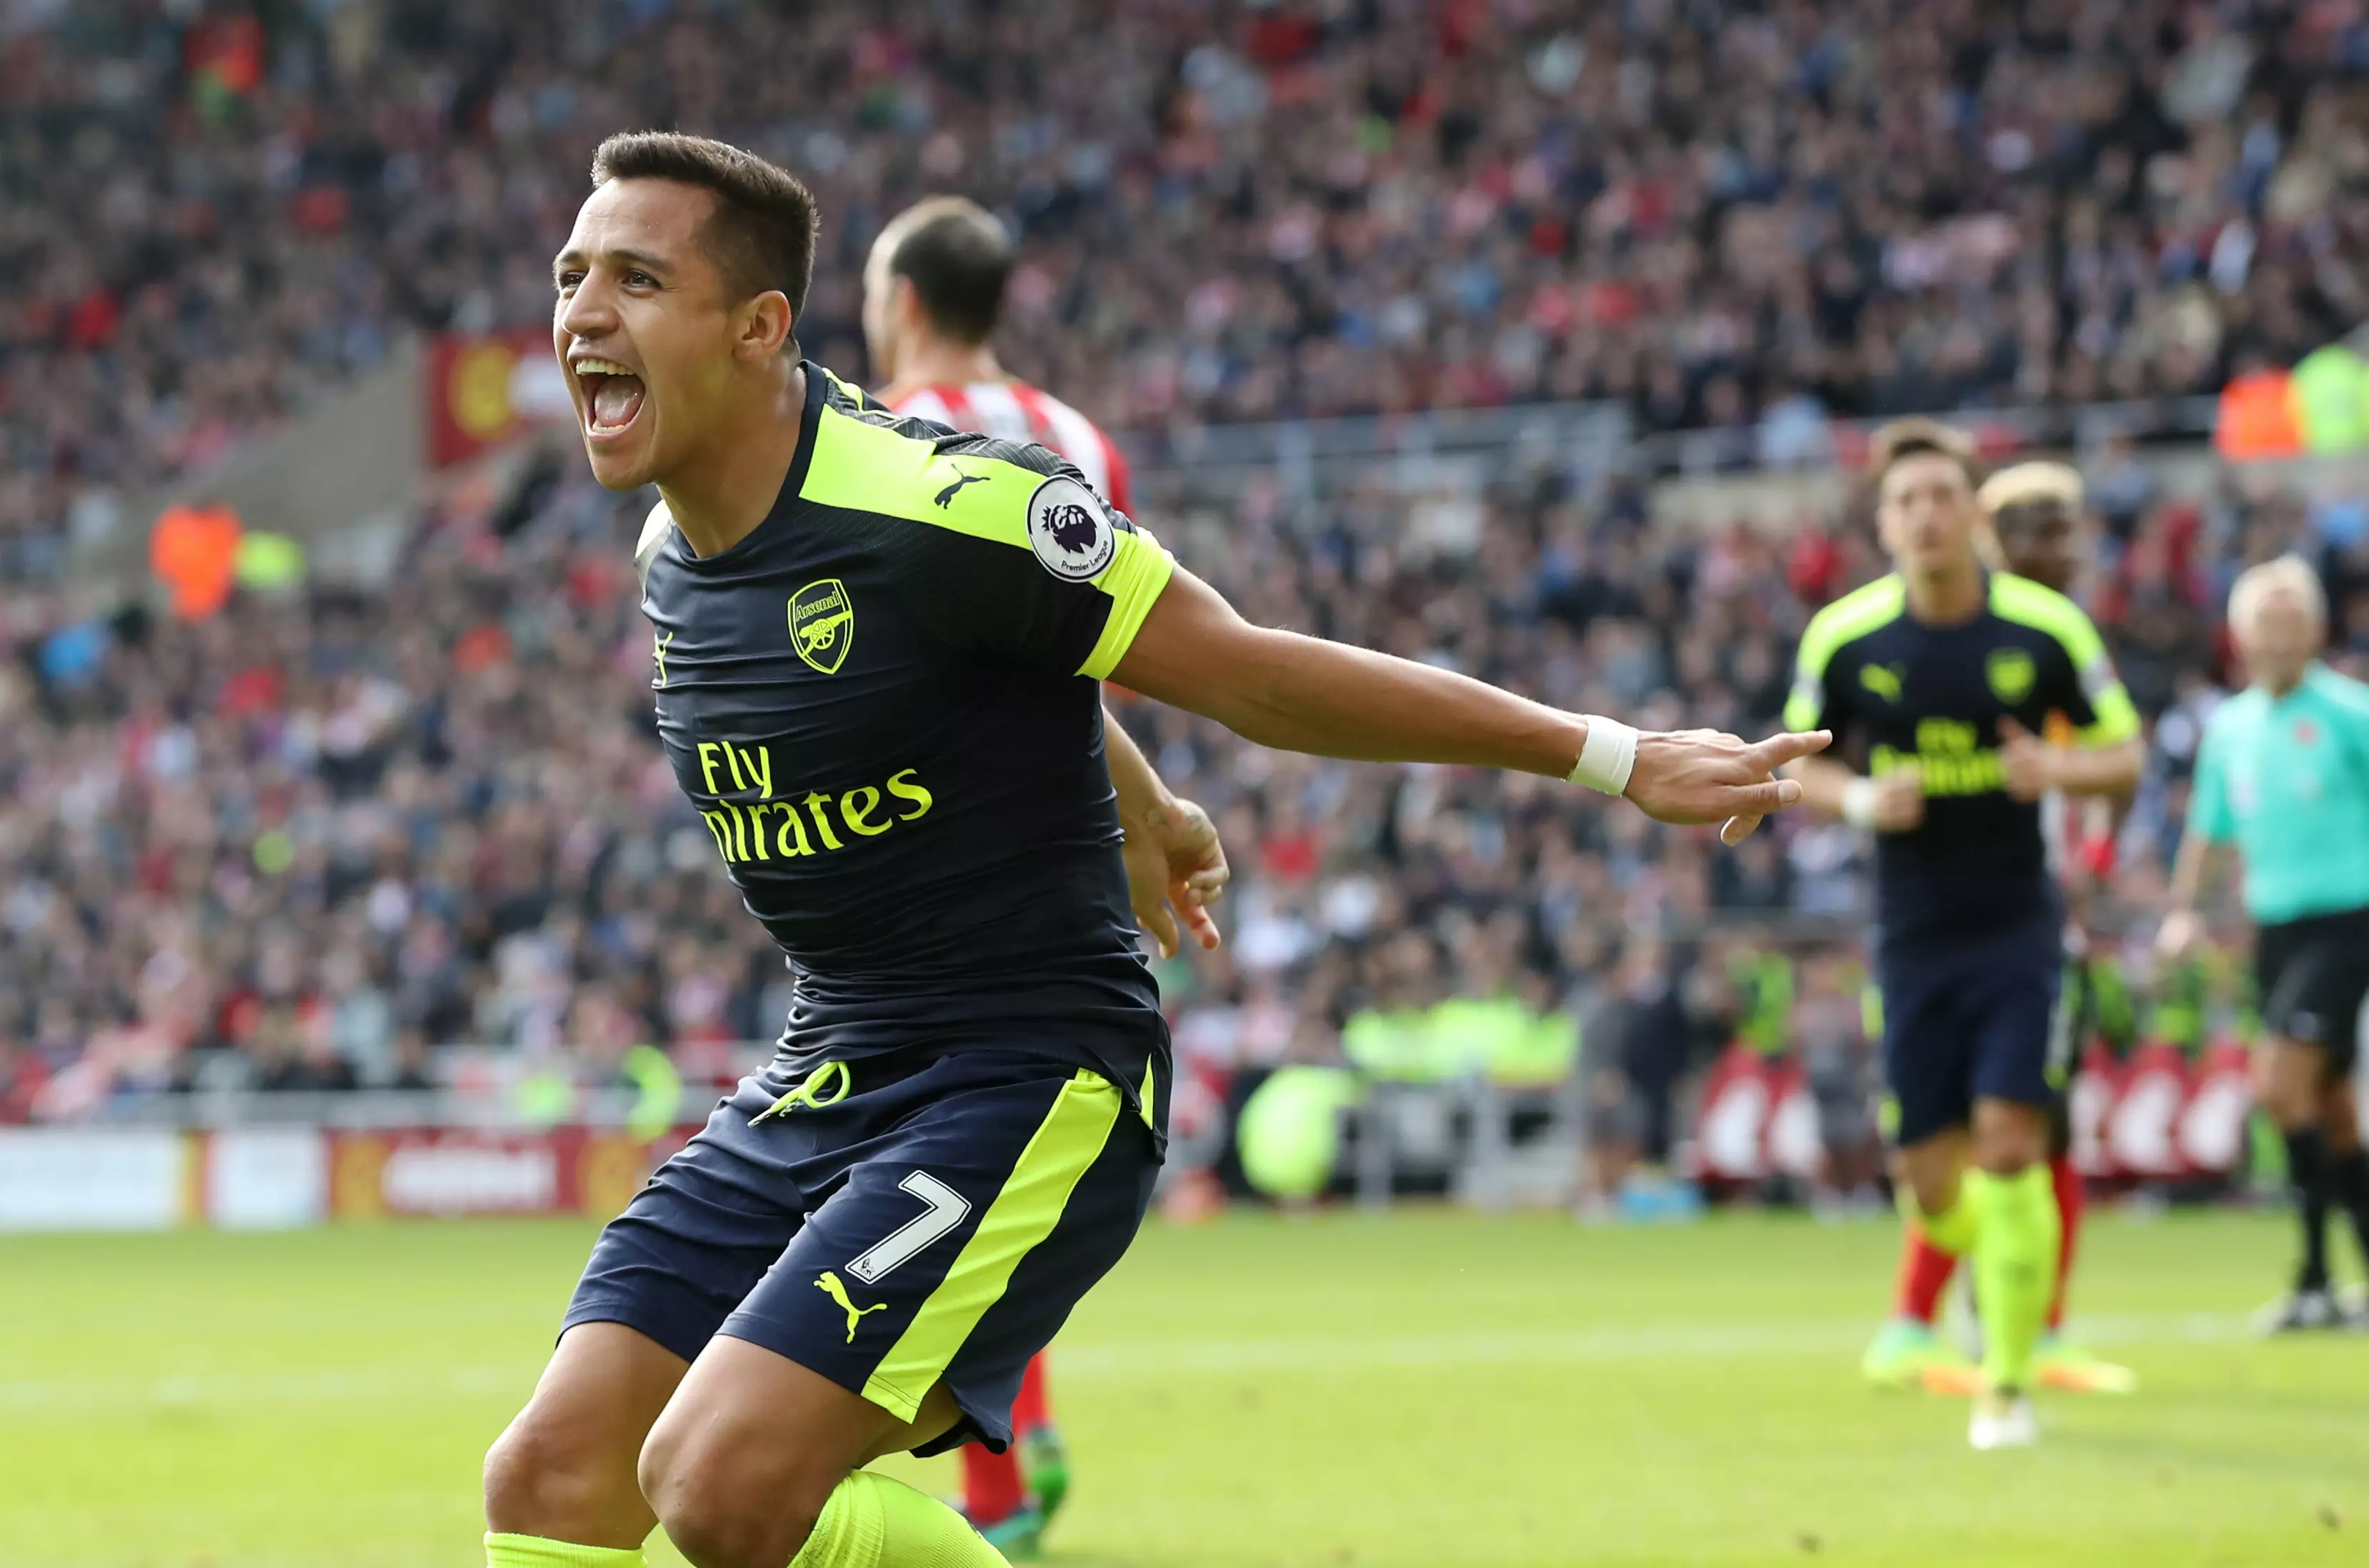 Alexis Sanchez Offered One Of The Highest Pay Packages Ever To Leave Arsenal